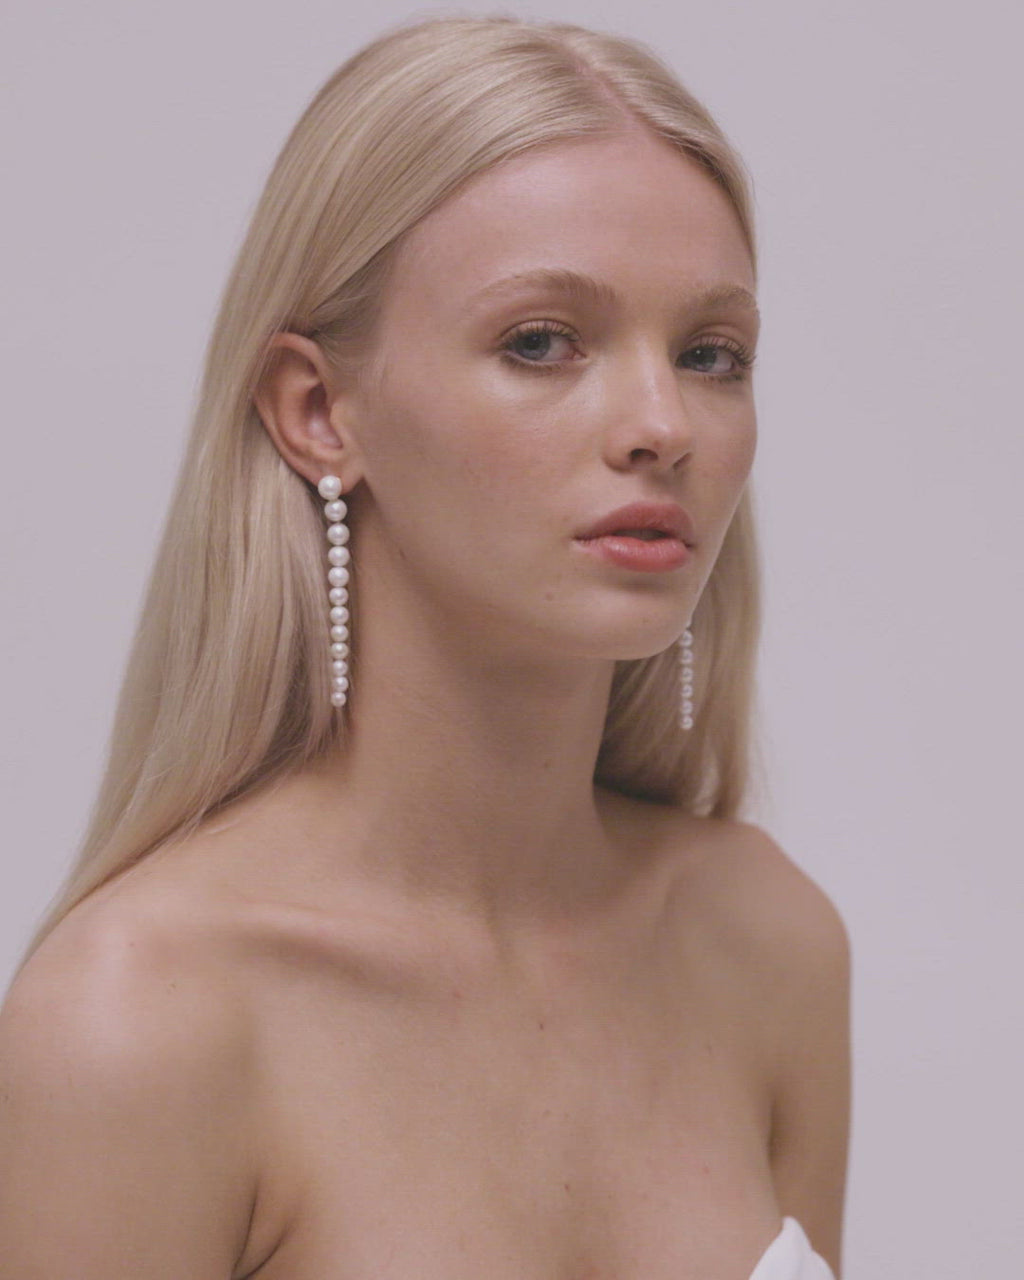 Video of a blonde bride with natural straight hair style and middle part showing pearl string earrings.